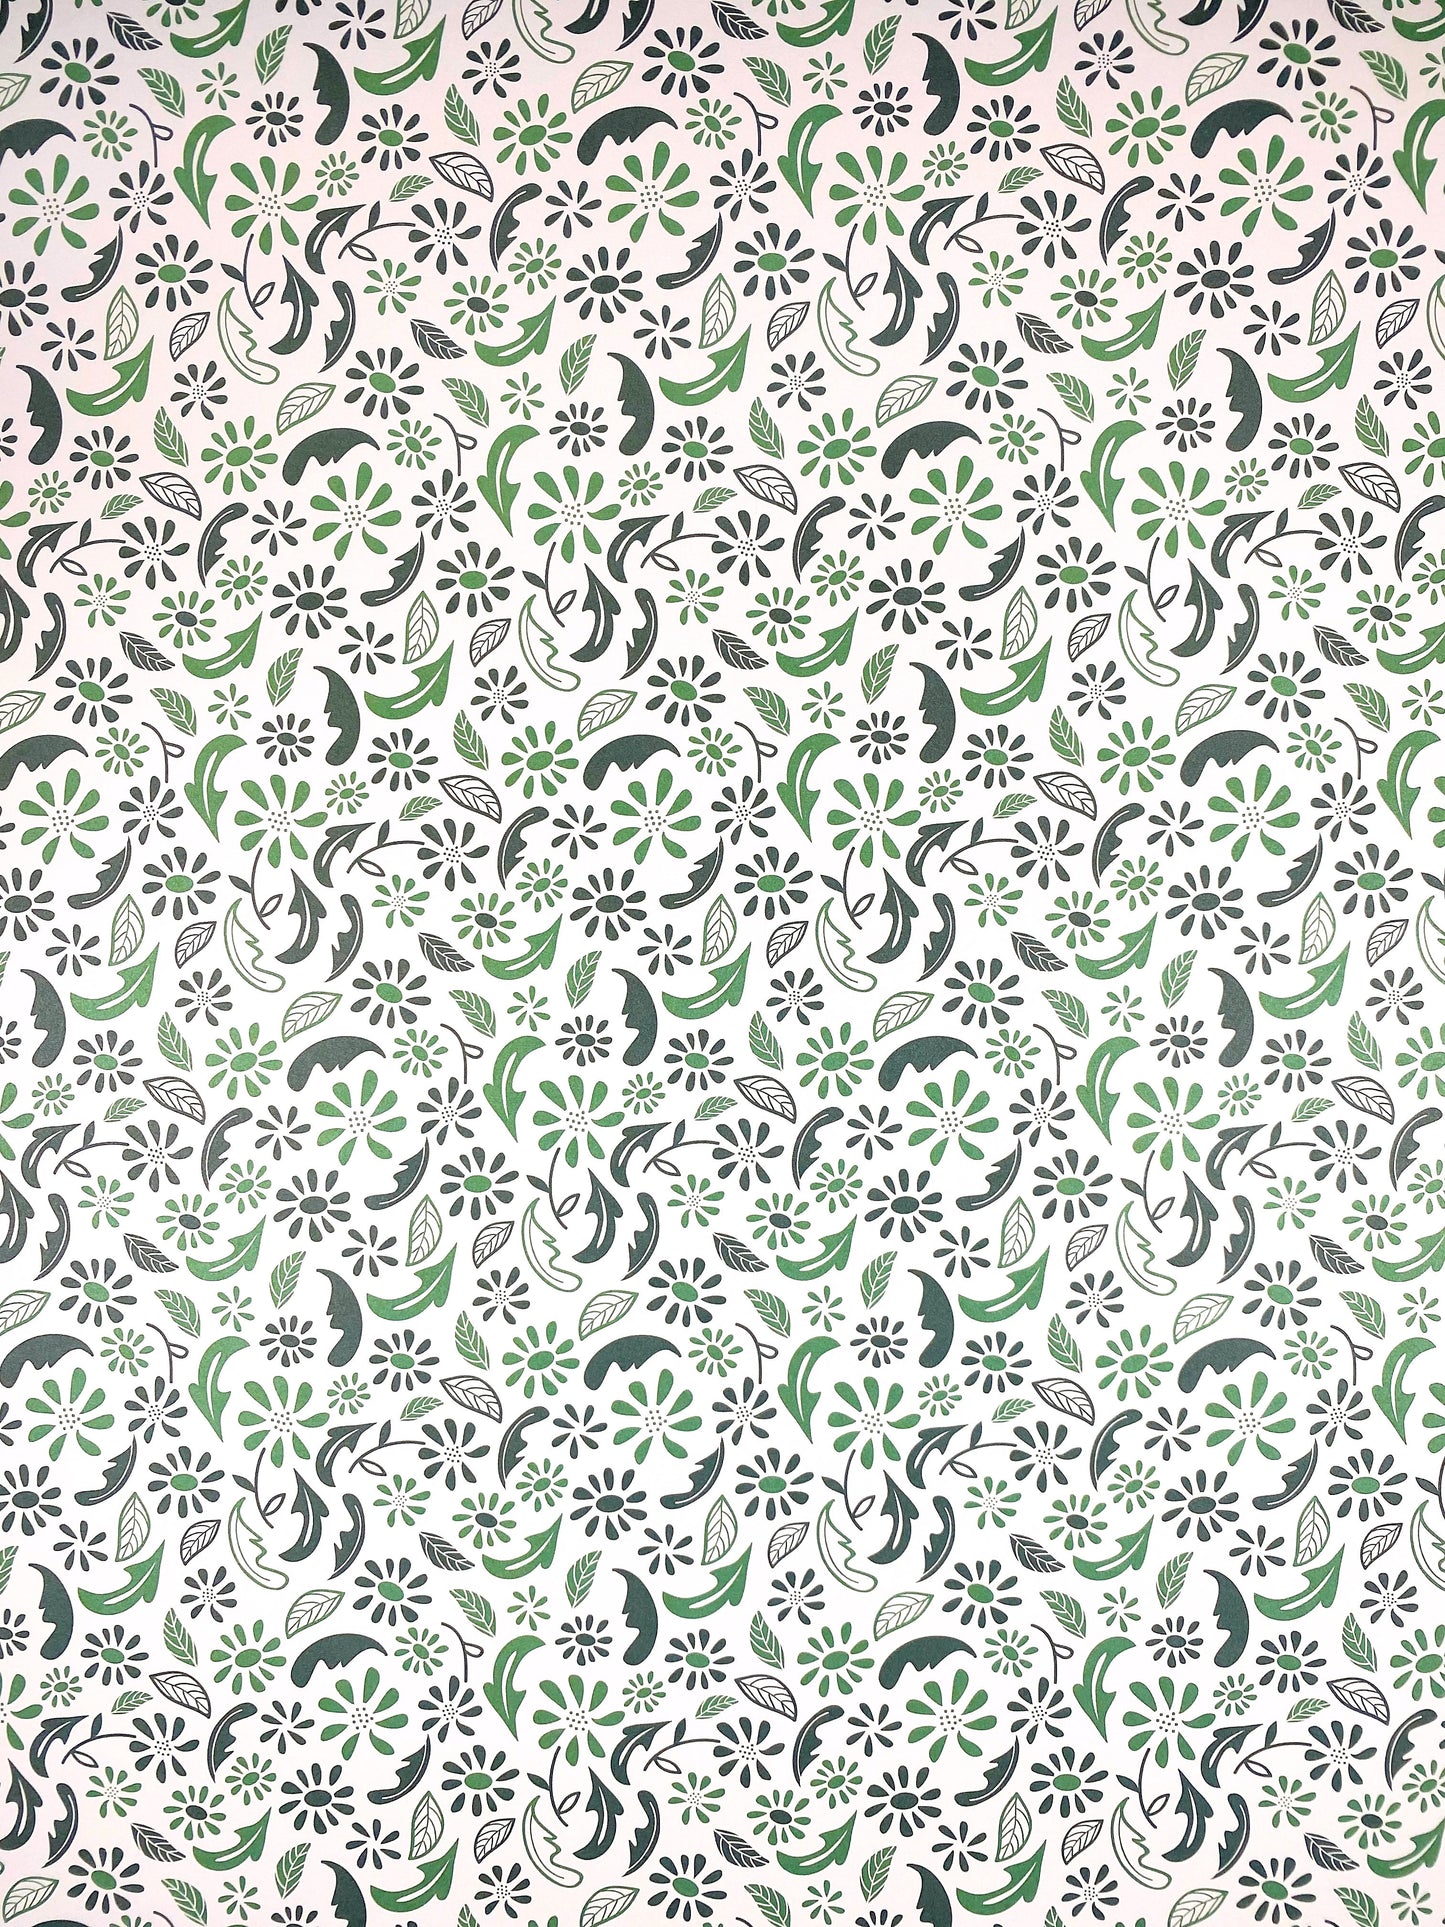 Wrapping Paper Sheet, Green Ditsy